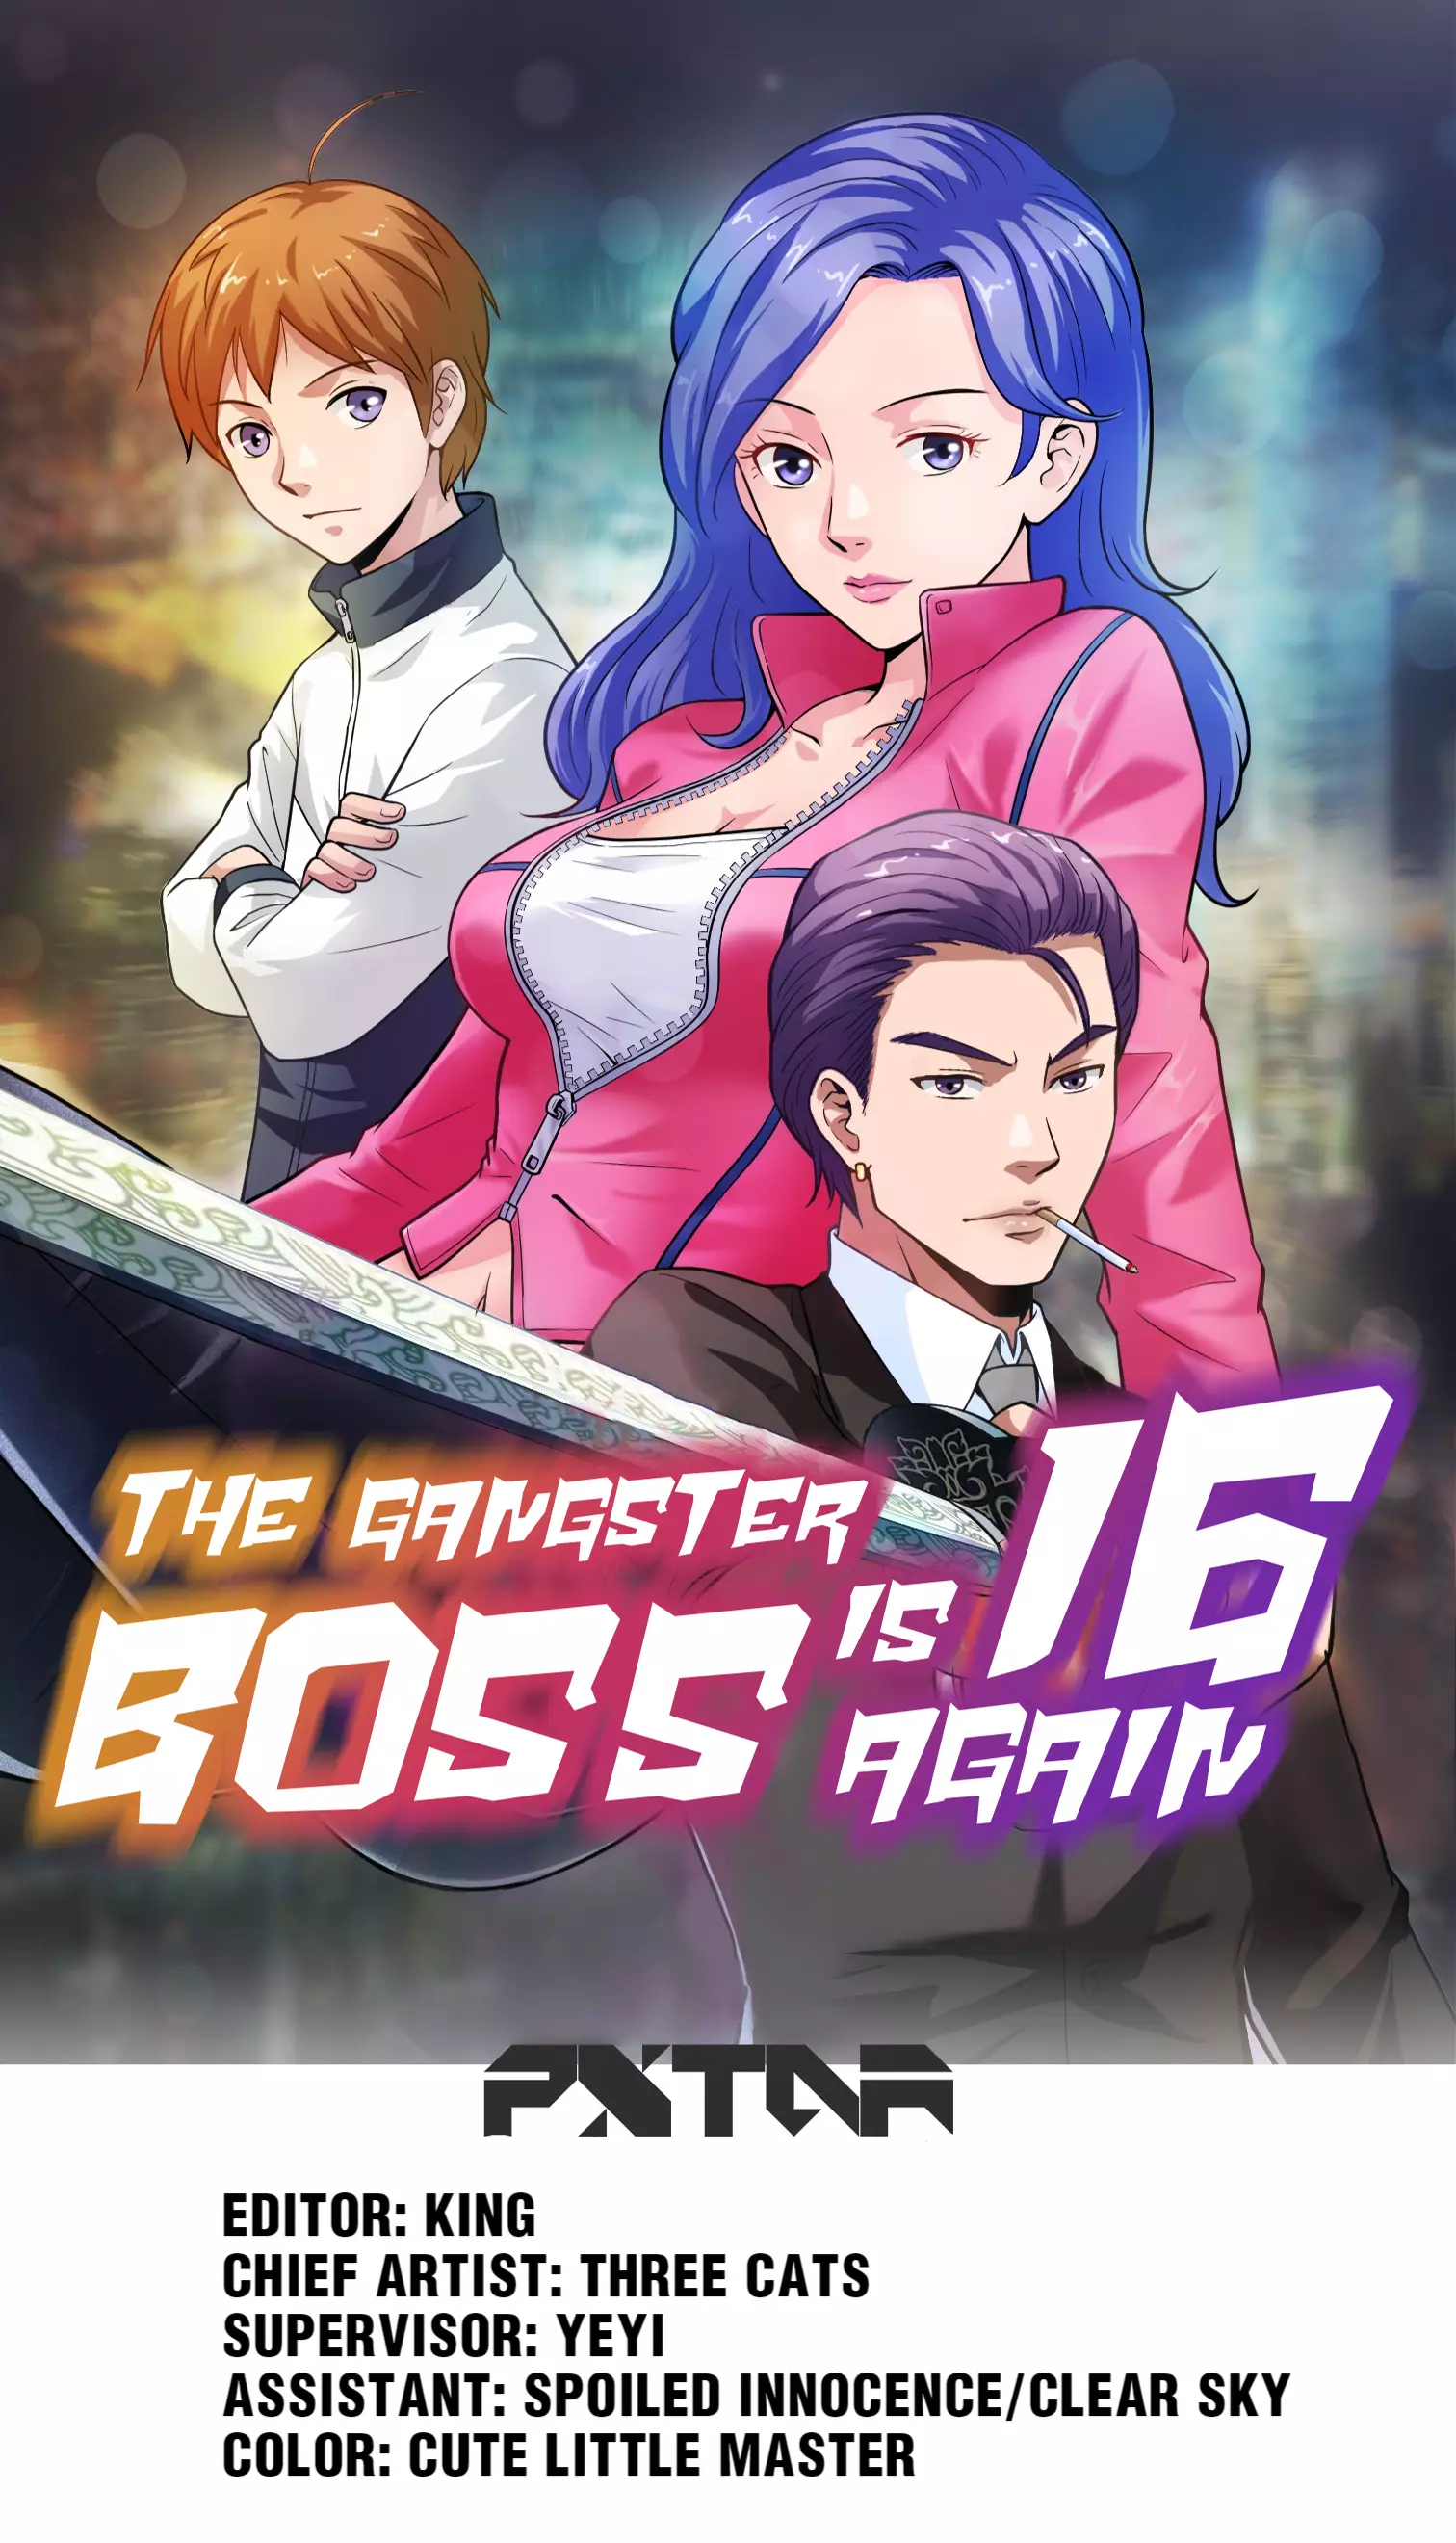 The Gangster Boss Is 16 Again - 43.1 page 1-c1a86a57